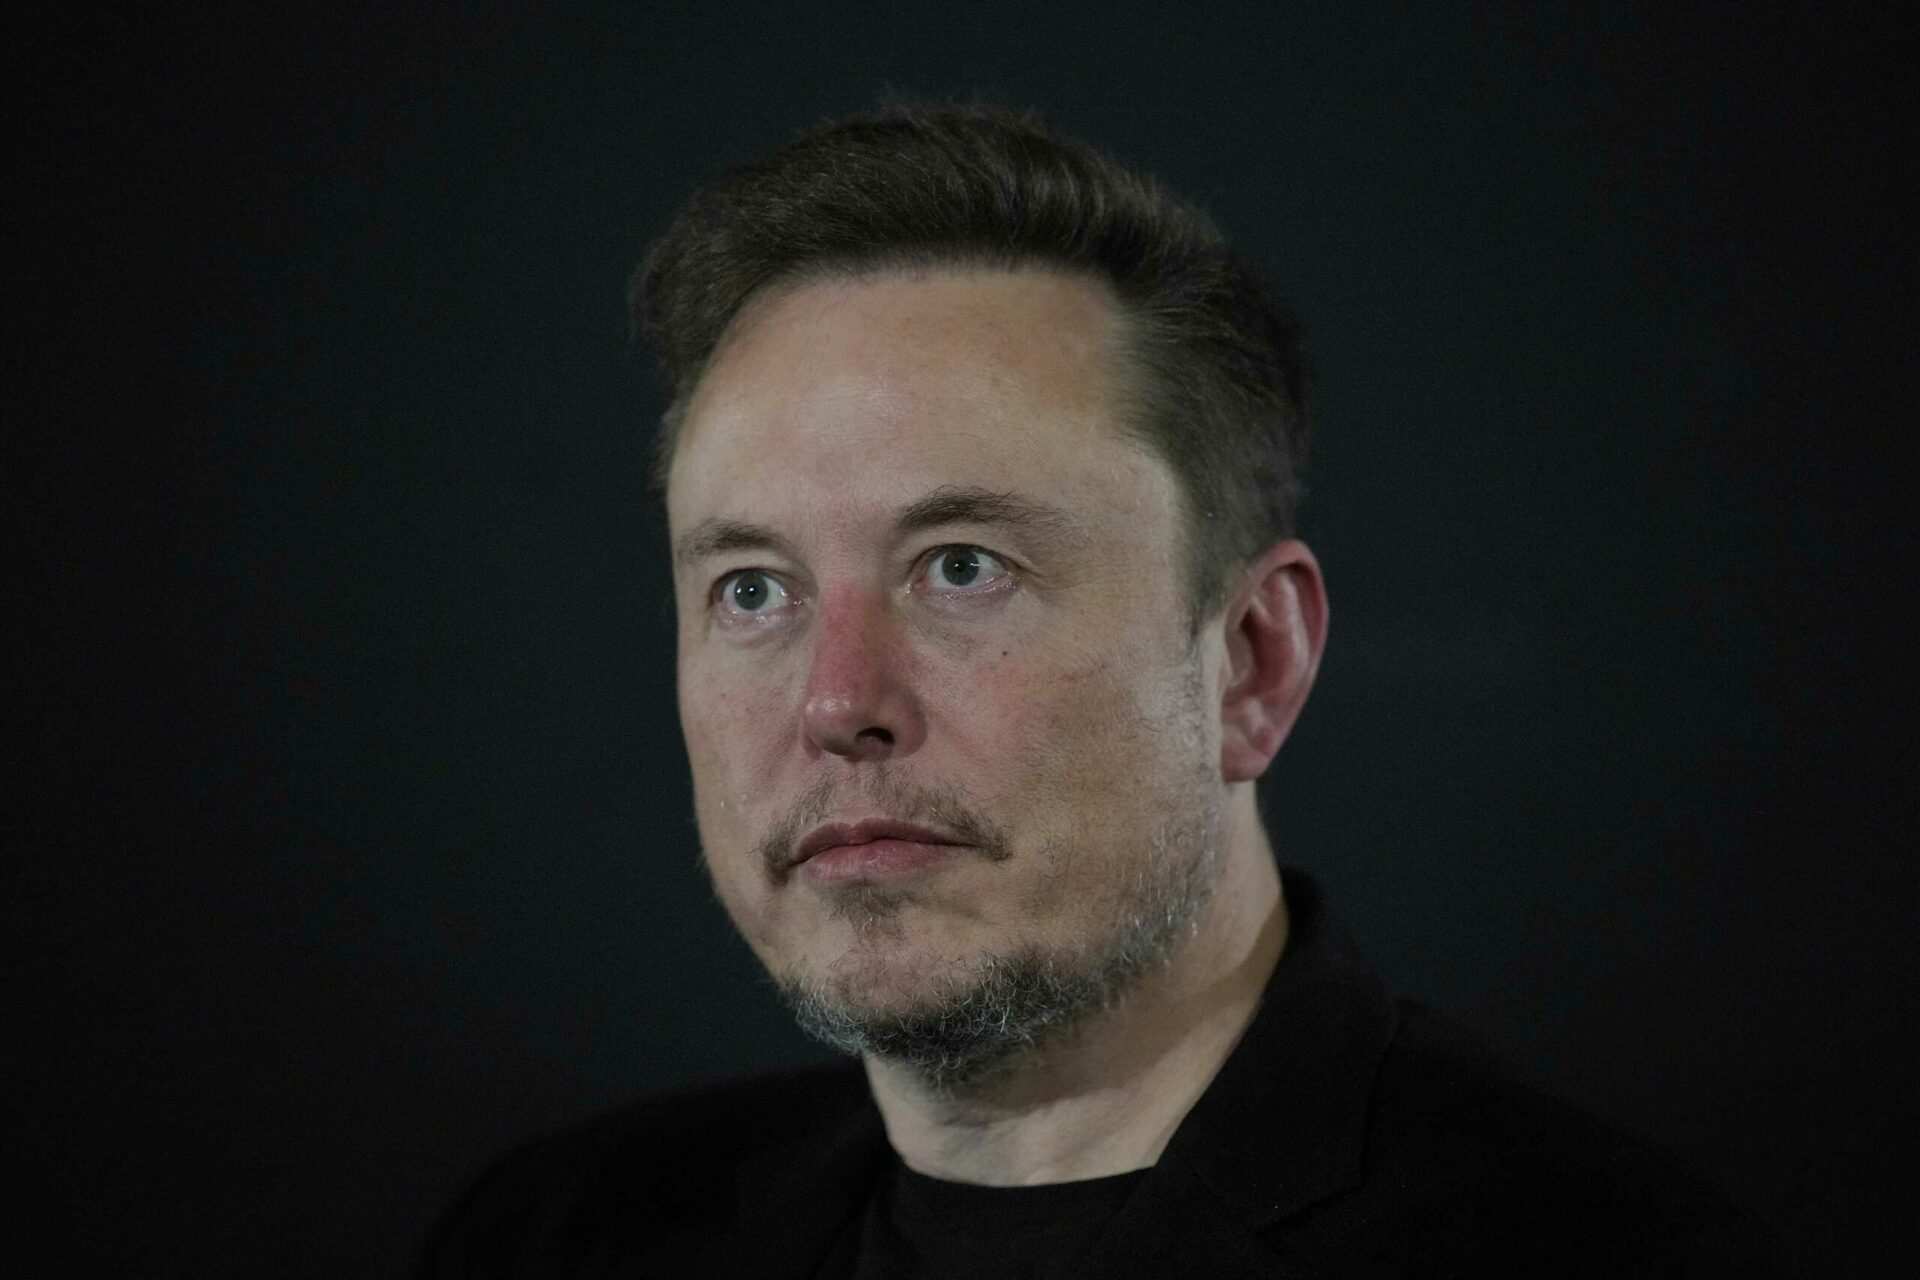 Musk accused of $7.5 billion of insider trades in investor suit